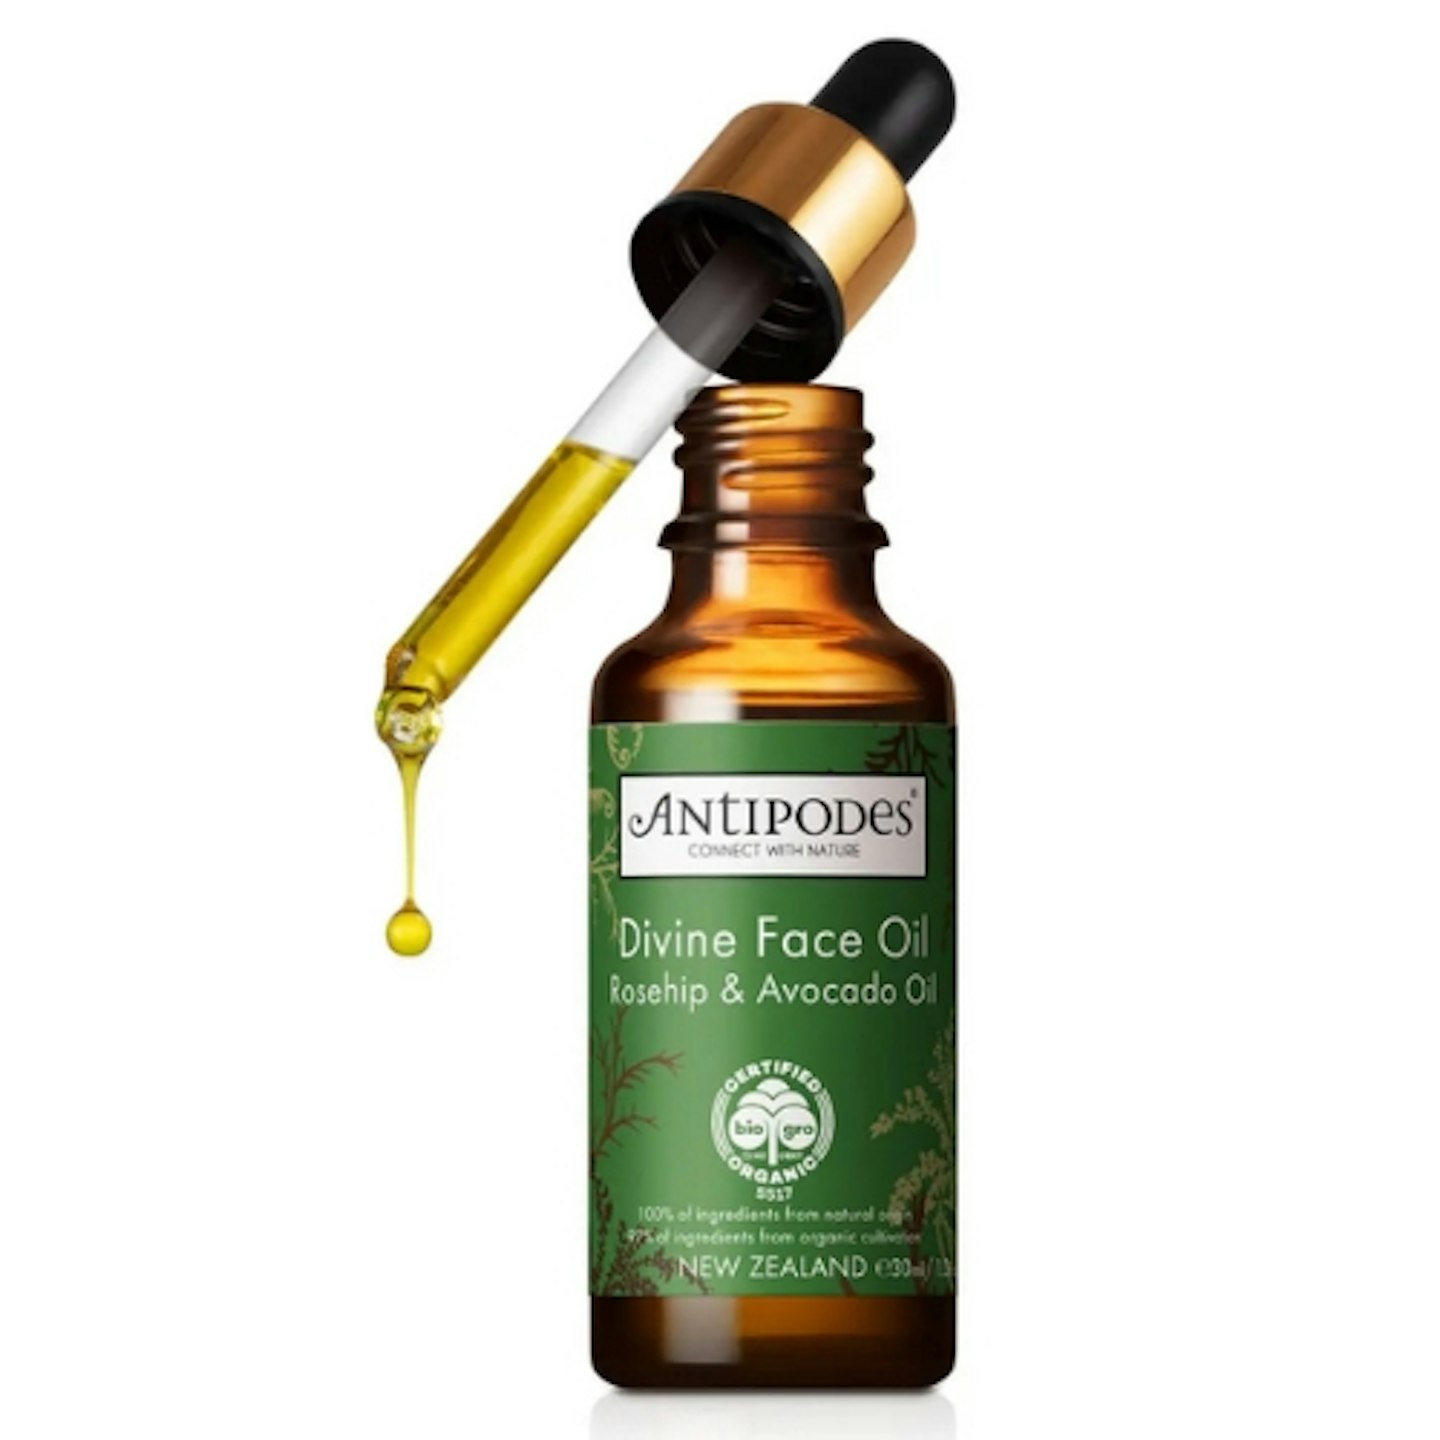 Antipodes Divine Face Oil Rosehip and Avocado Oil